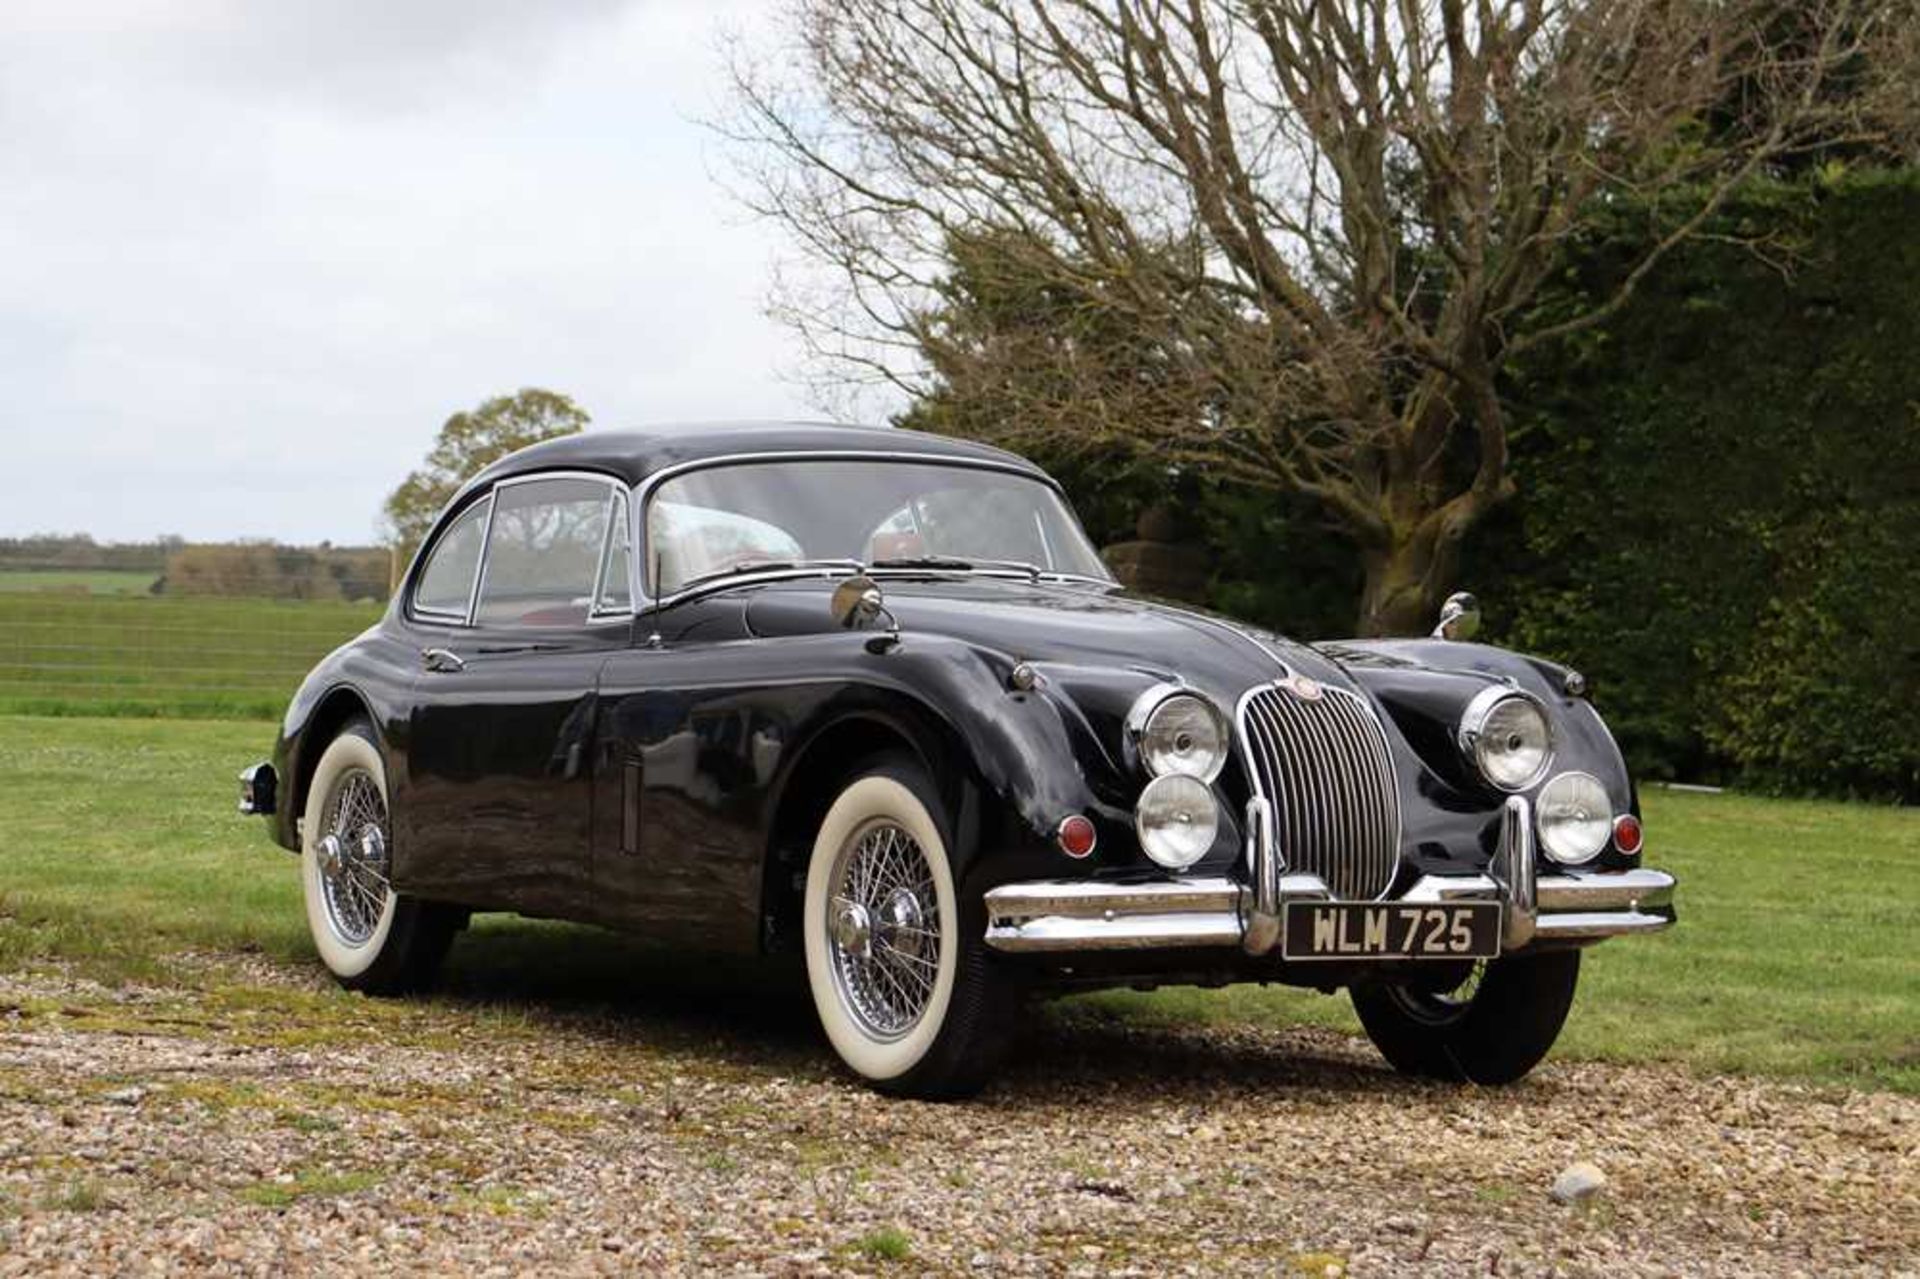 1959 Jaguar XK 150 Fixed Head Coupe 1 of just 1,368 RHD examples made - Image 2 of 49